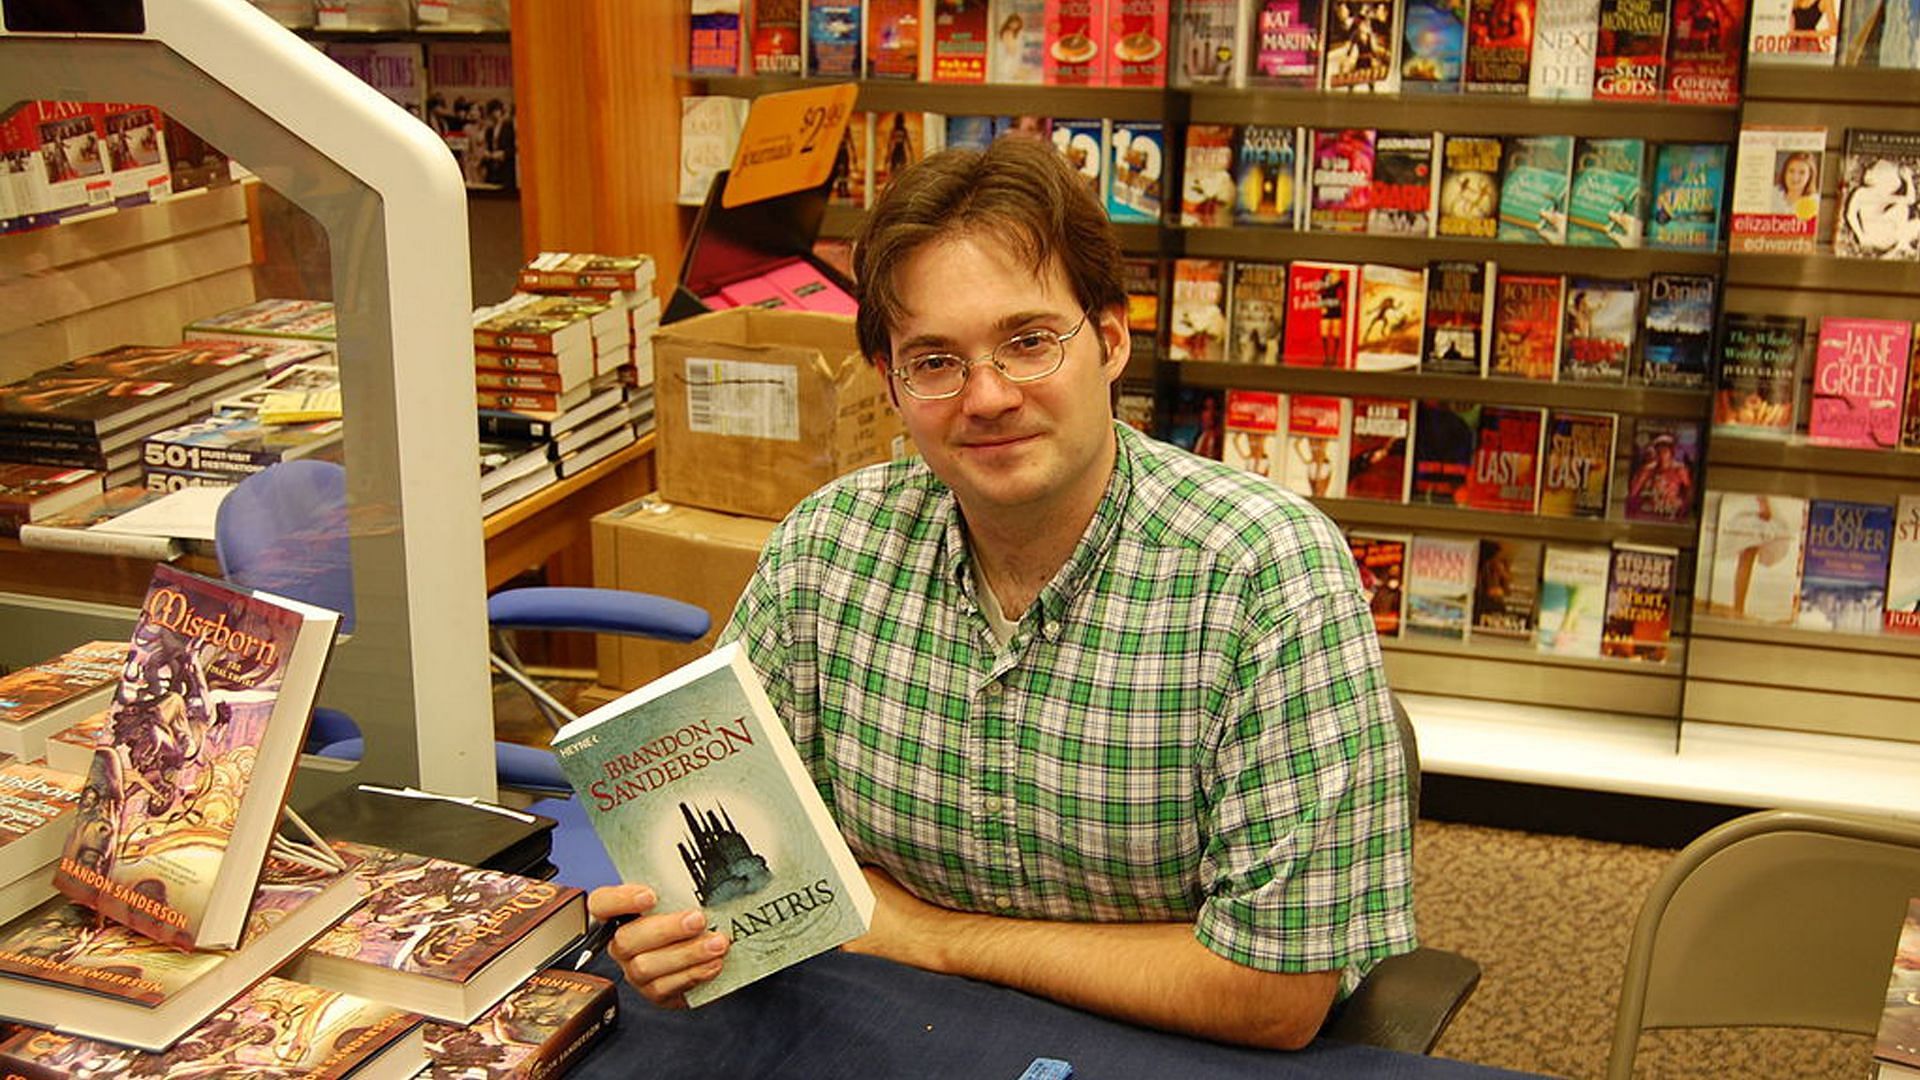 Fans of Brandon Sanderson slam Wired profile on the author (Image via Wikimedia commons) 